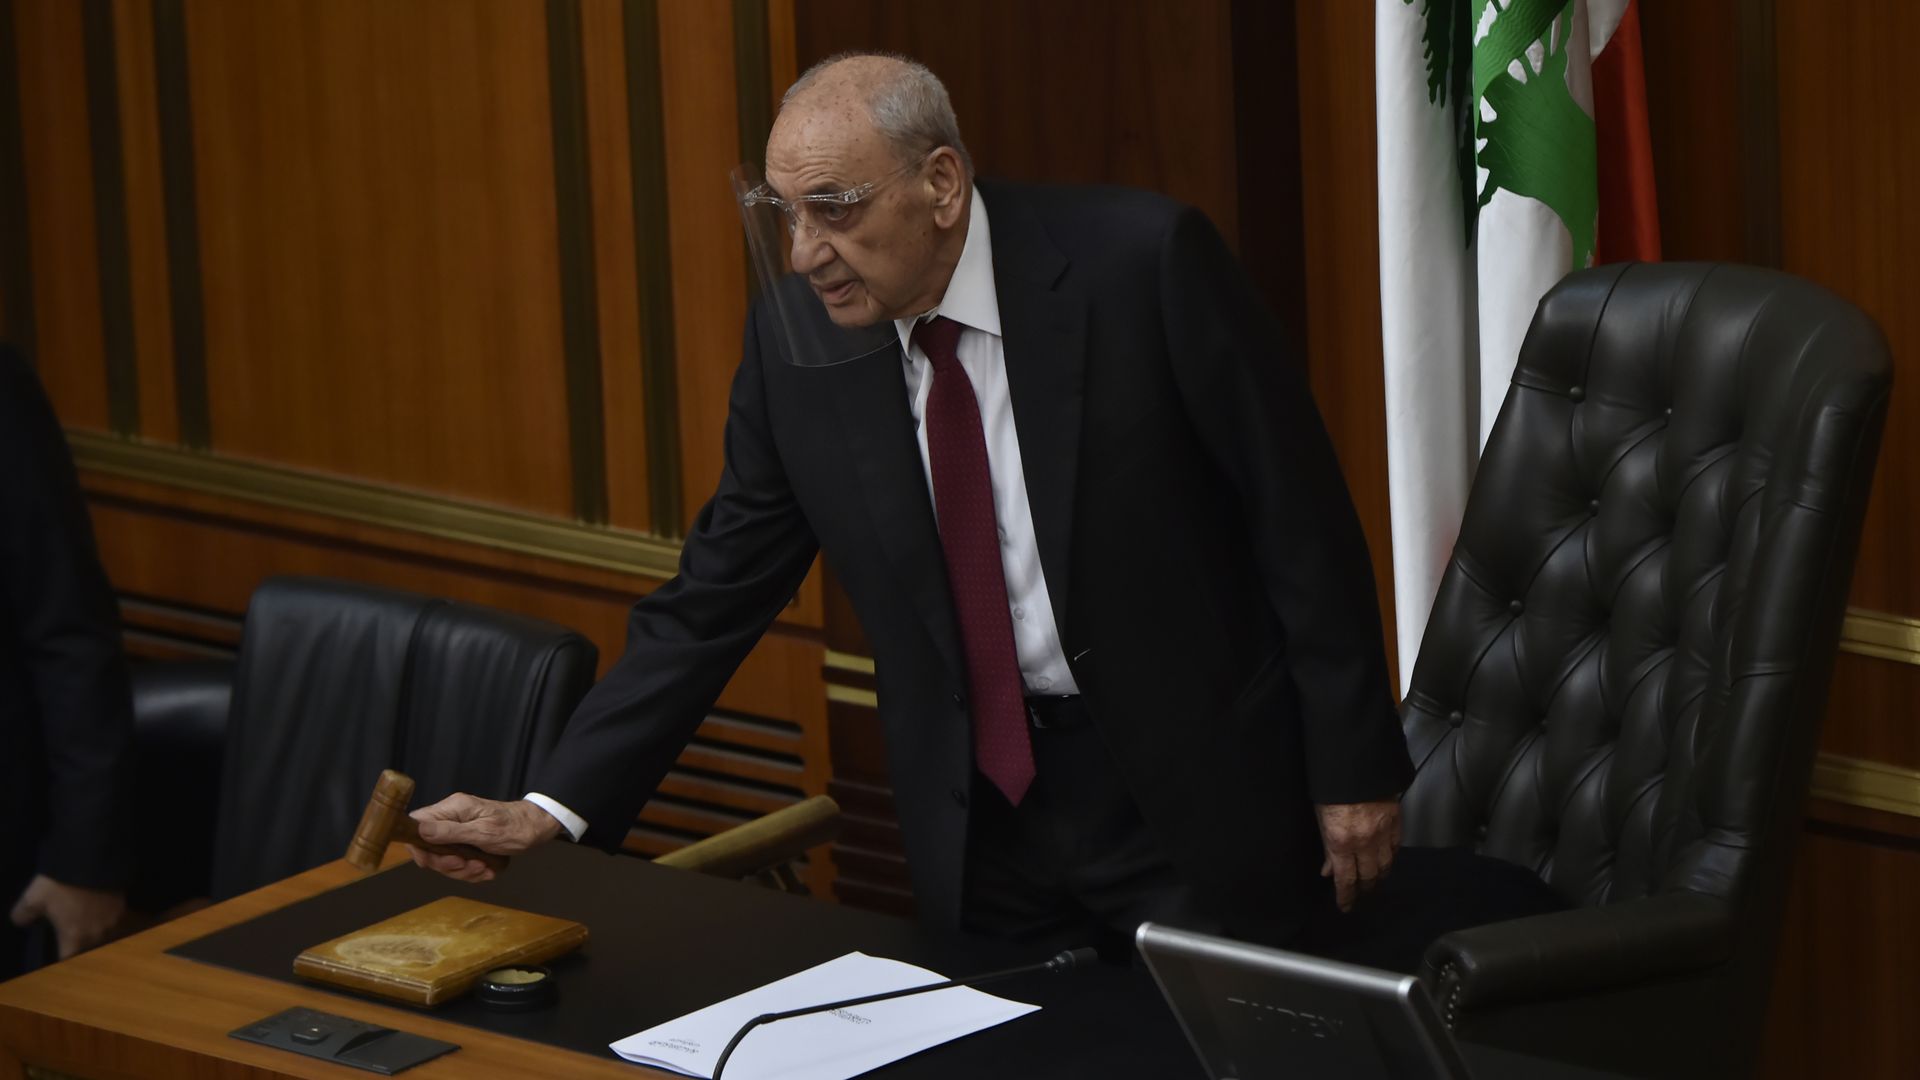 peaker of the Lebanese Parliament leads the session for the president election in Beirut, Lebanon on December 15, 2022